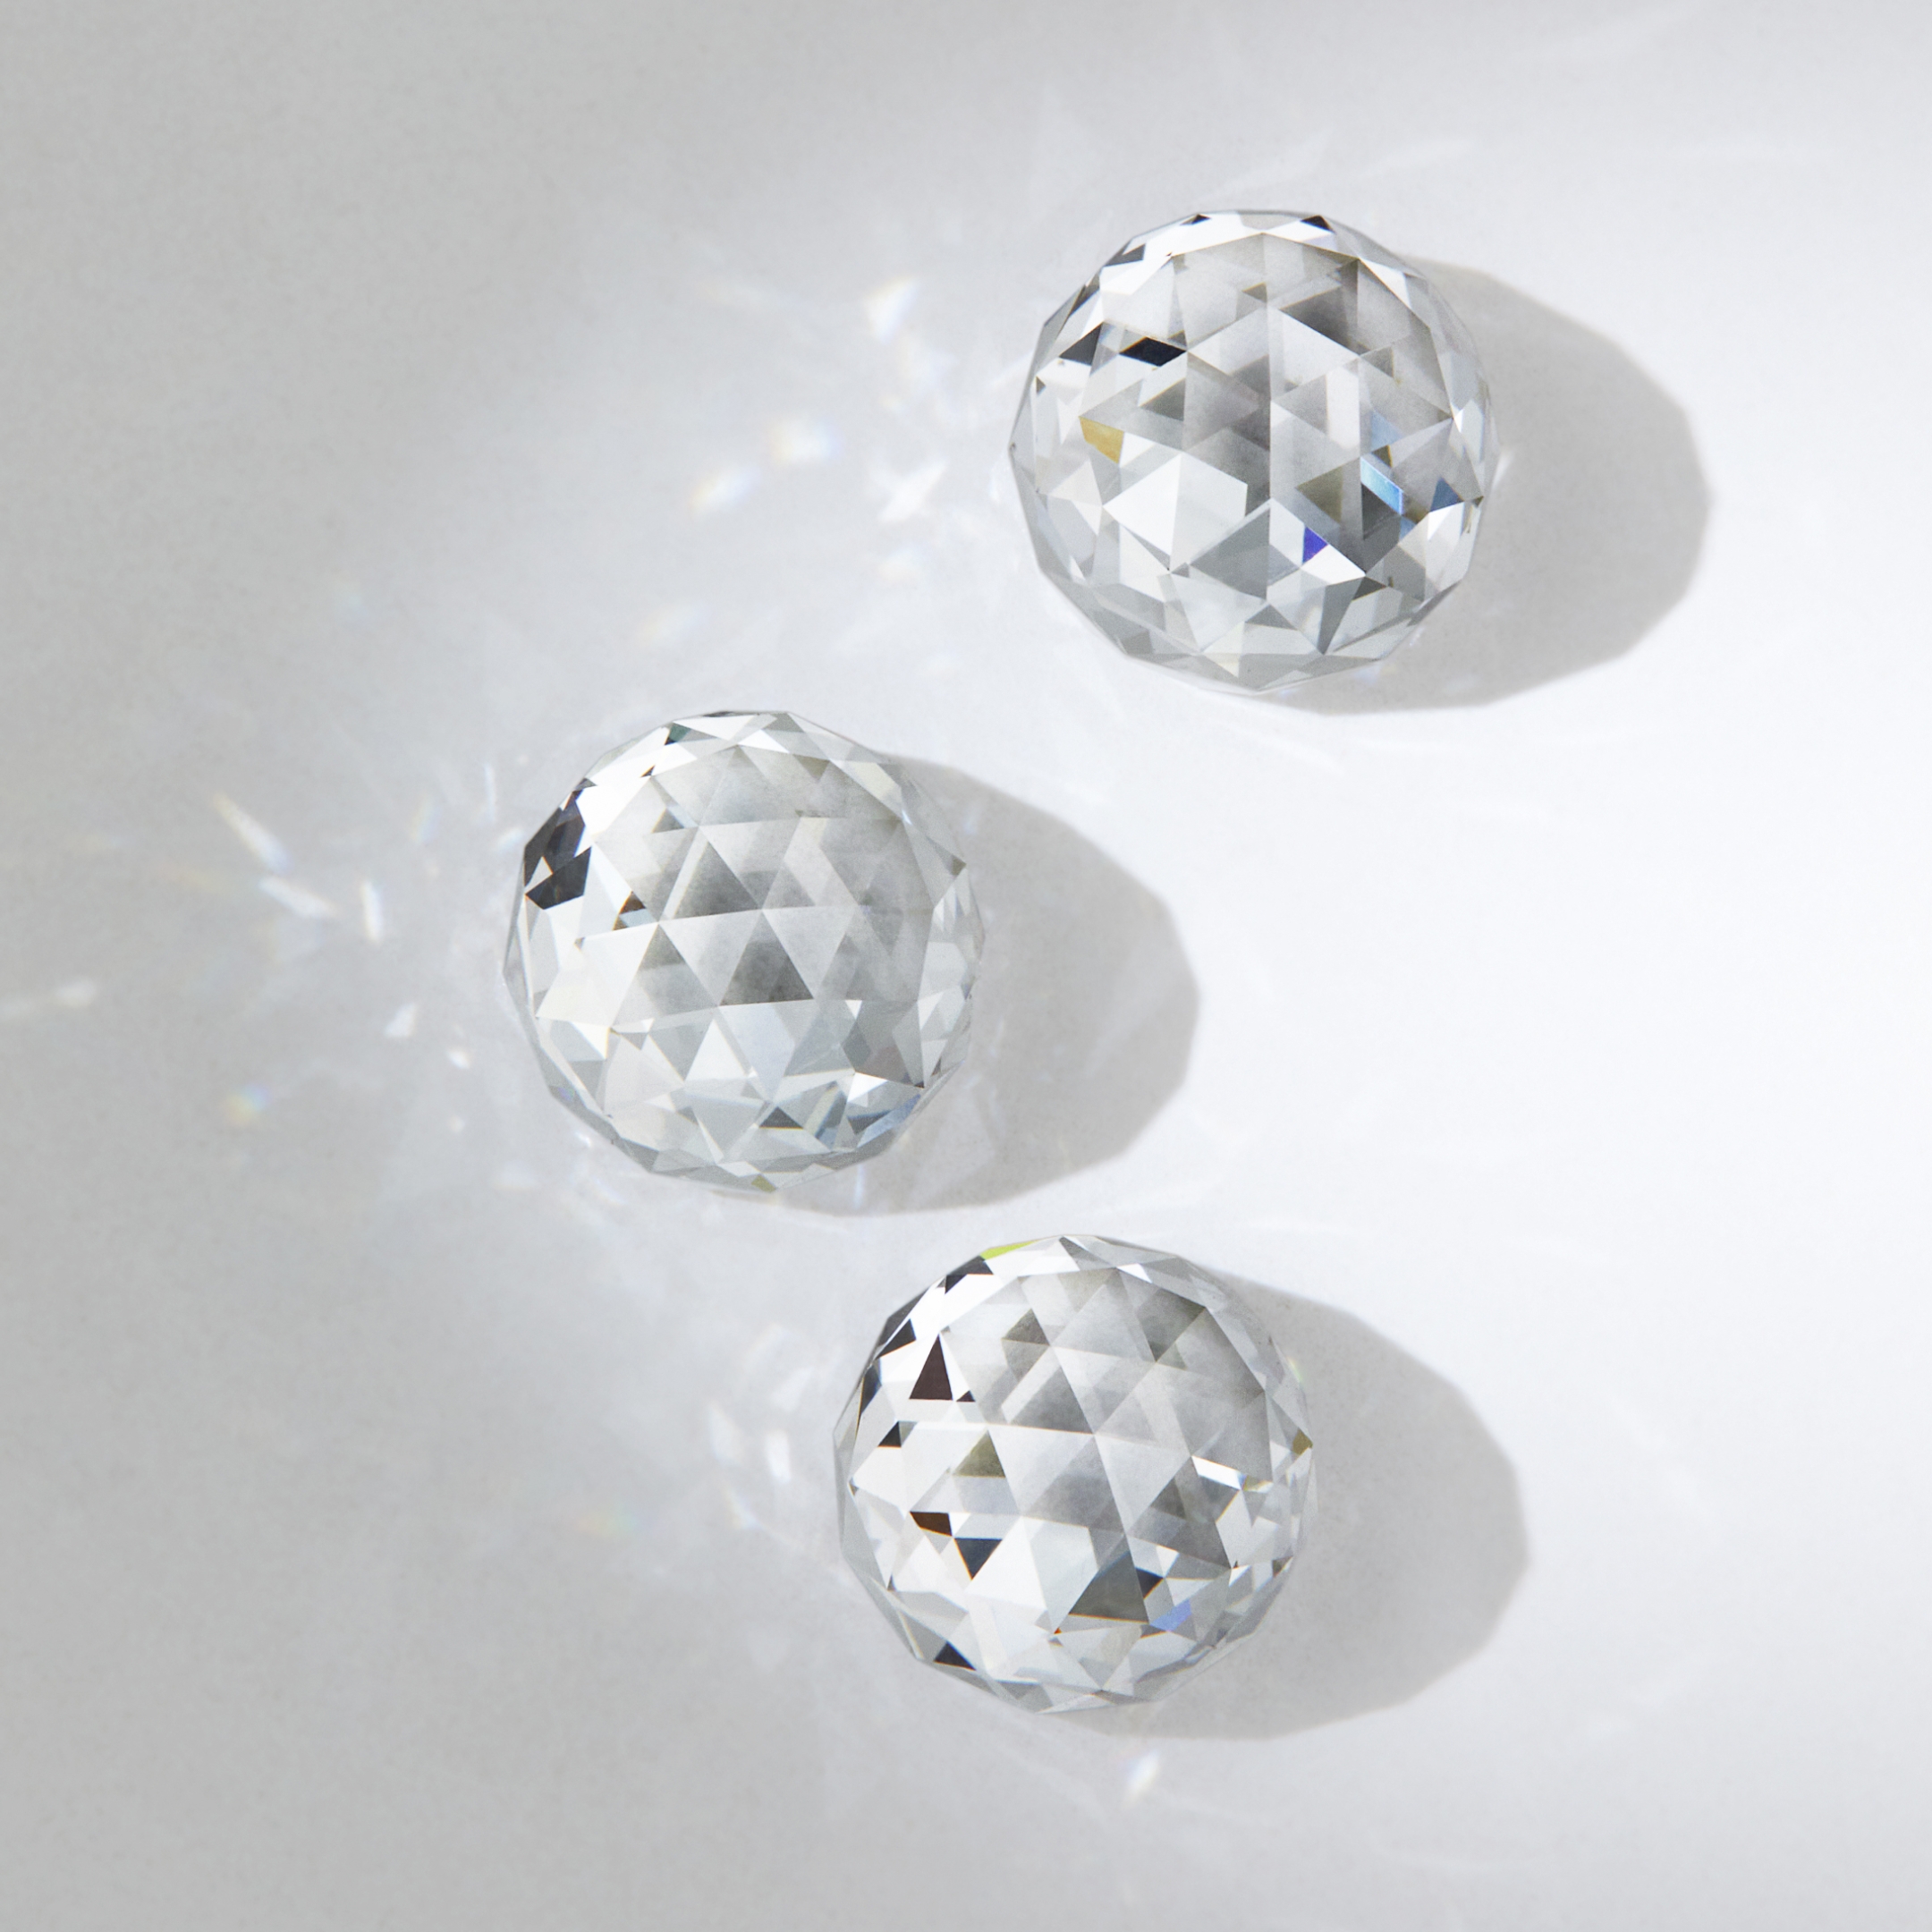 Unsaid diamond cuts for jewellery collections